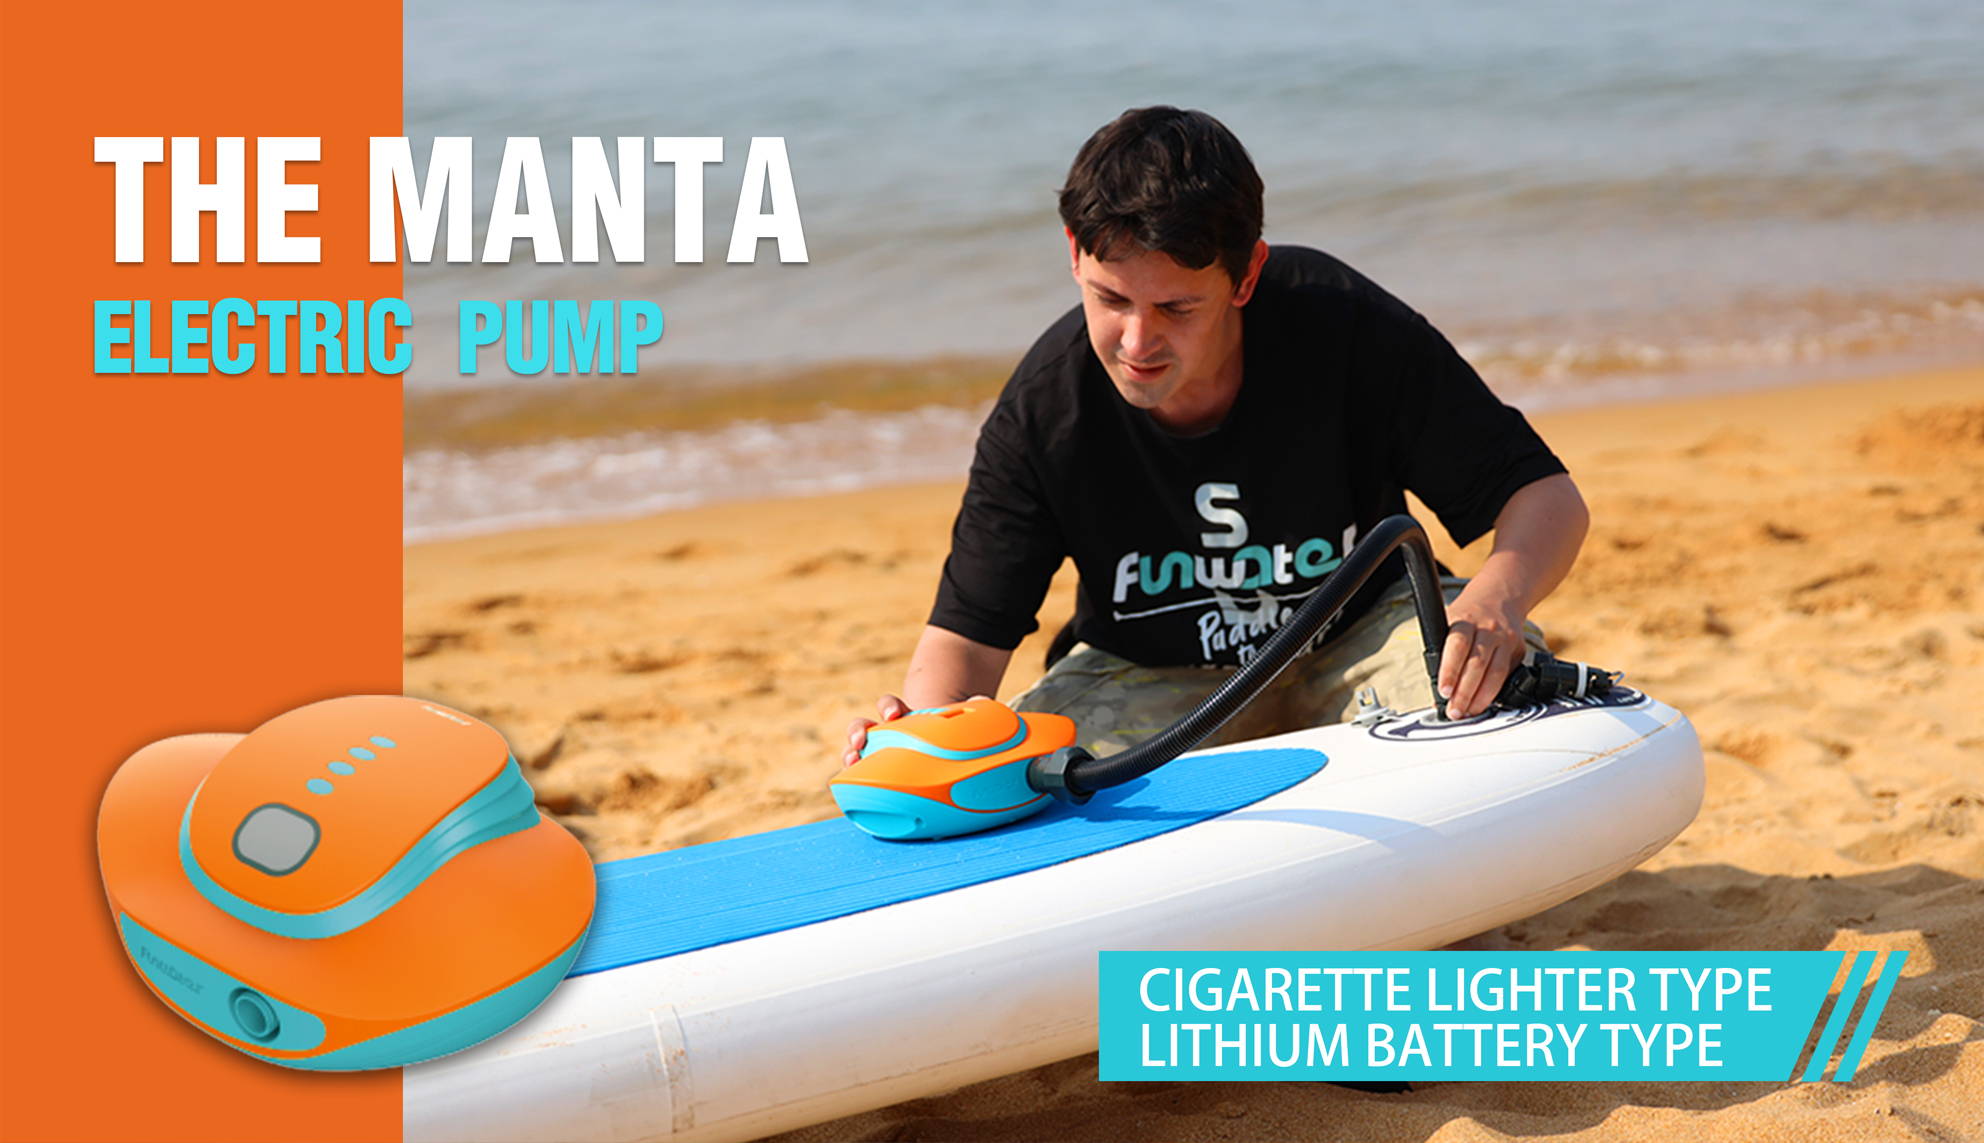 A man uses this electric pump to inflate his paddleboard